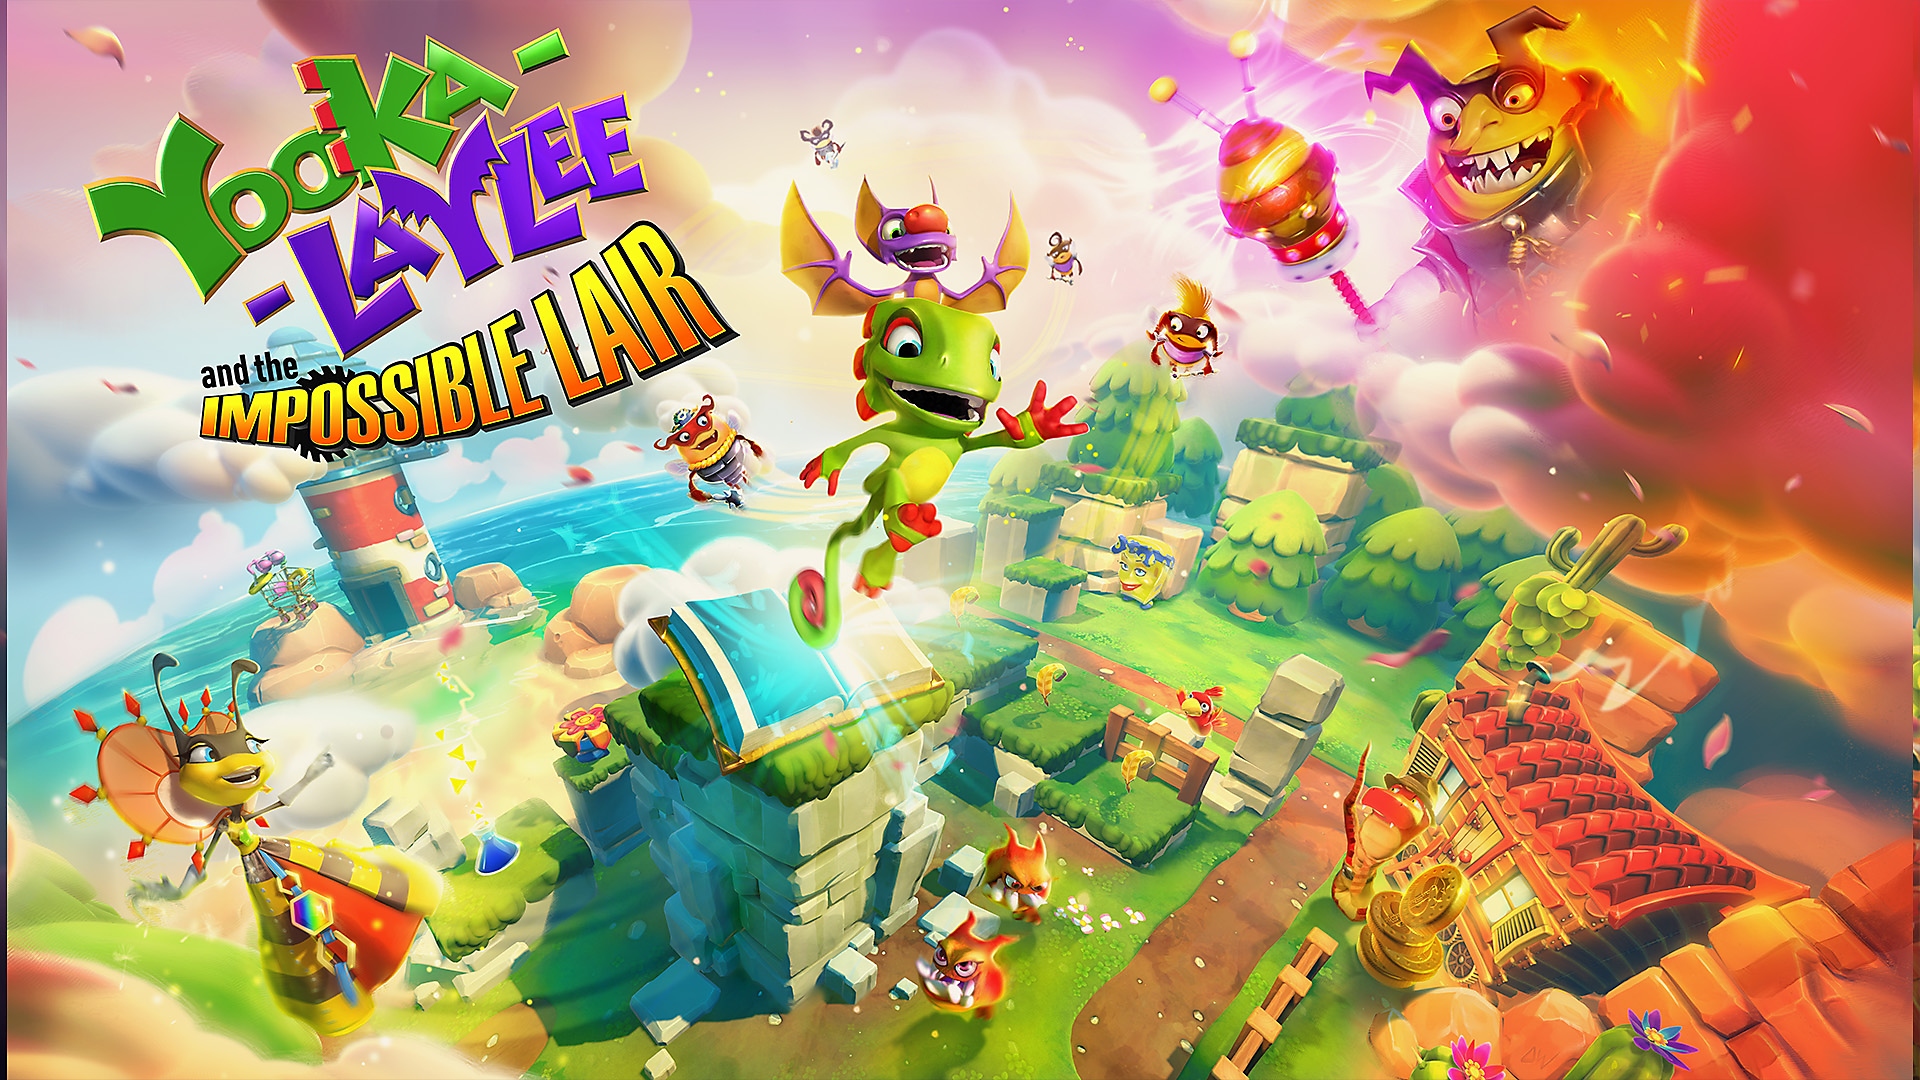 Yooka-Laylee and the Impossible Lair - Bande-annonce